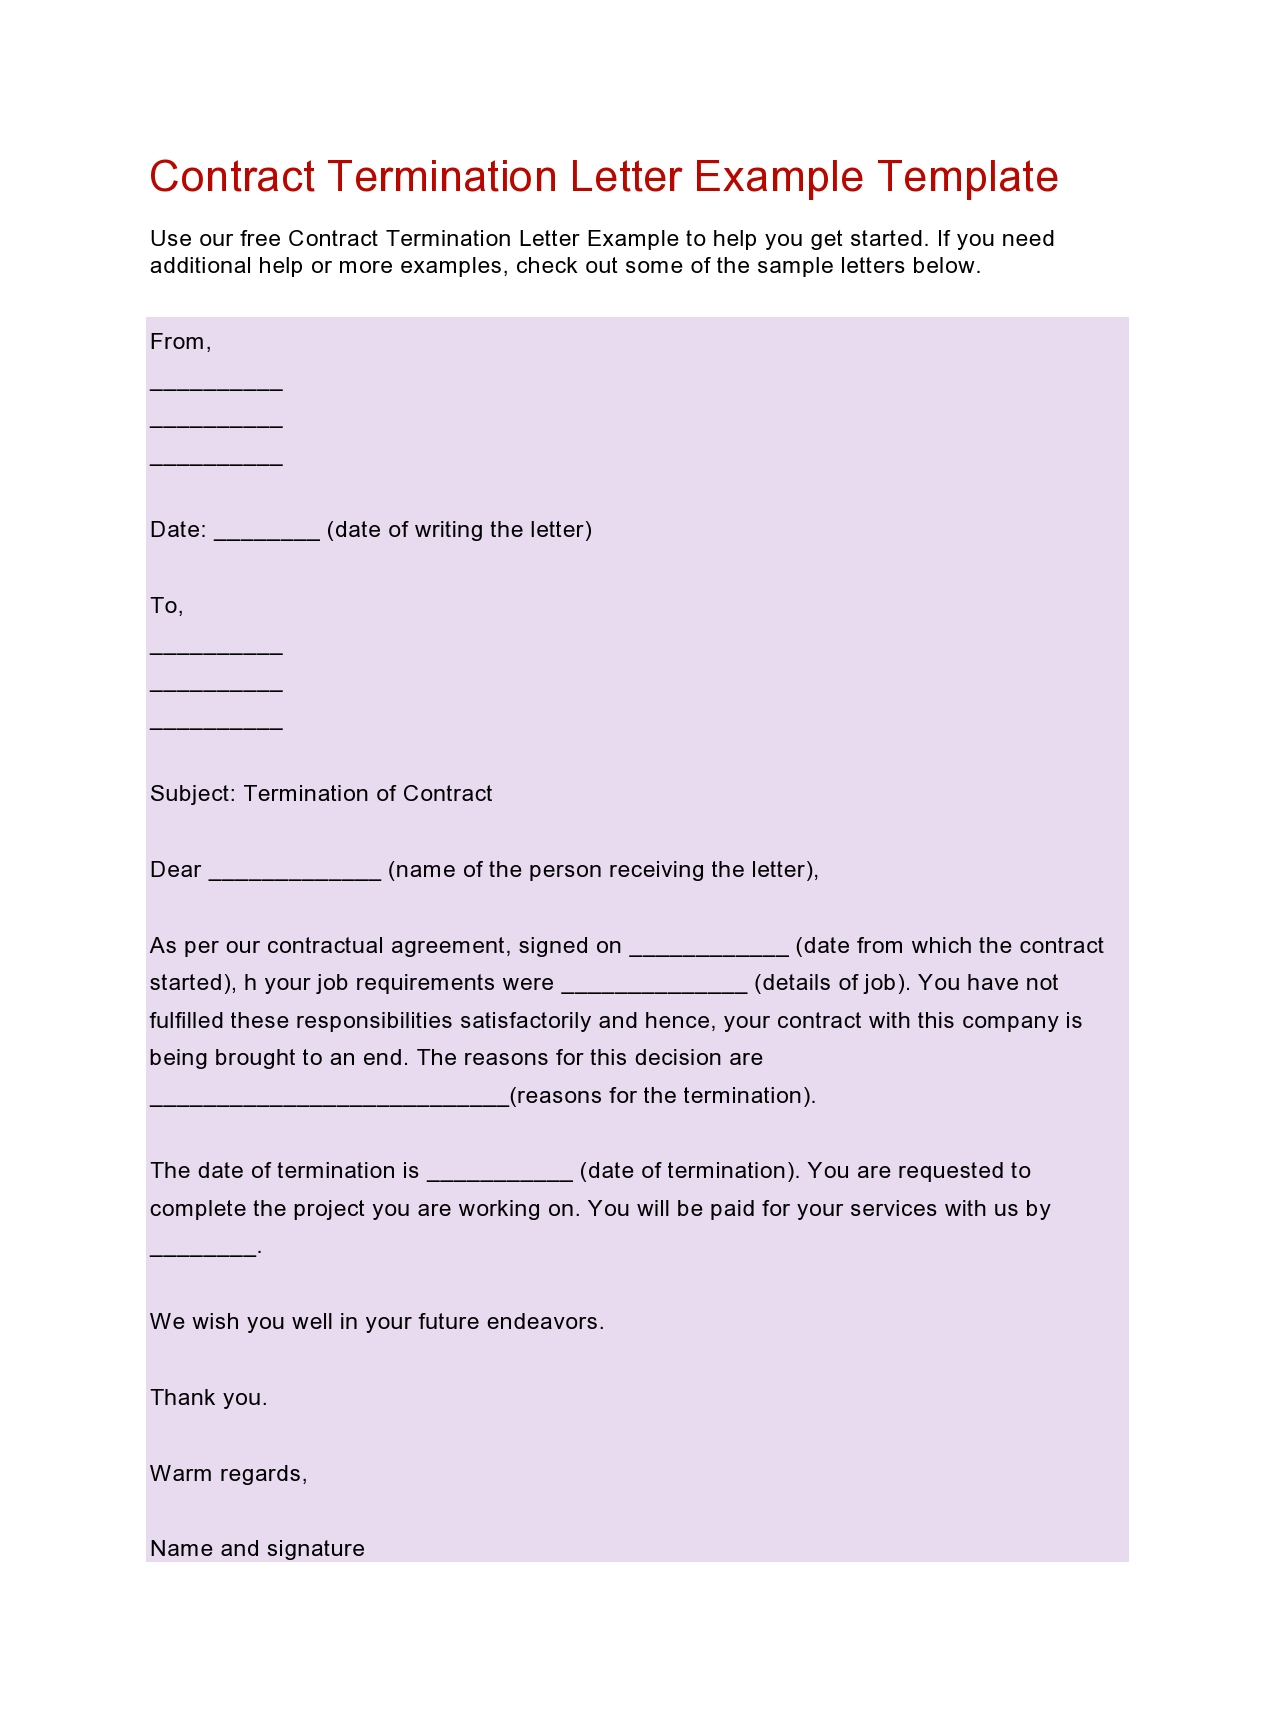 Free contract termination letter 39